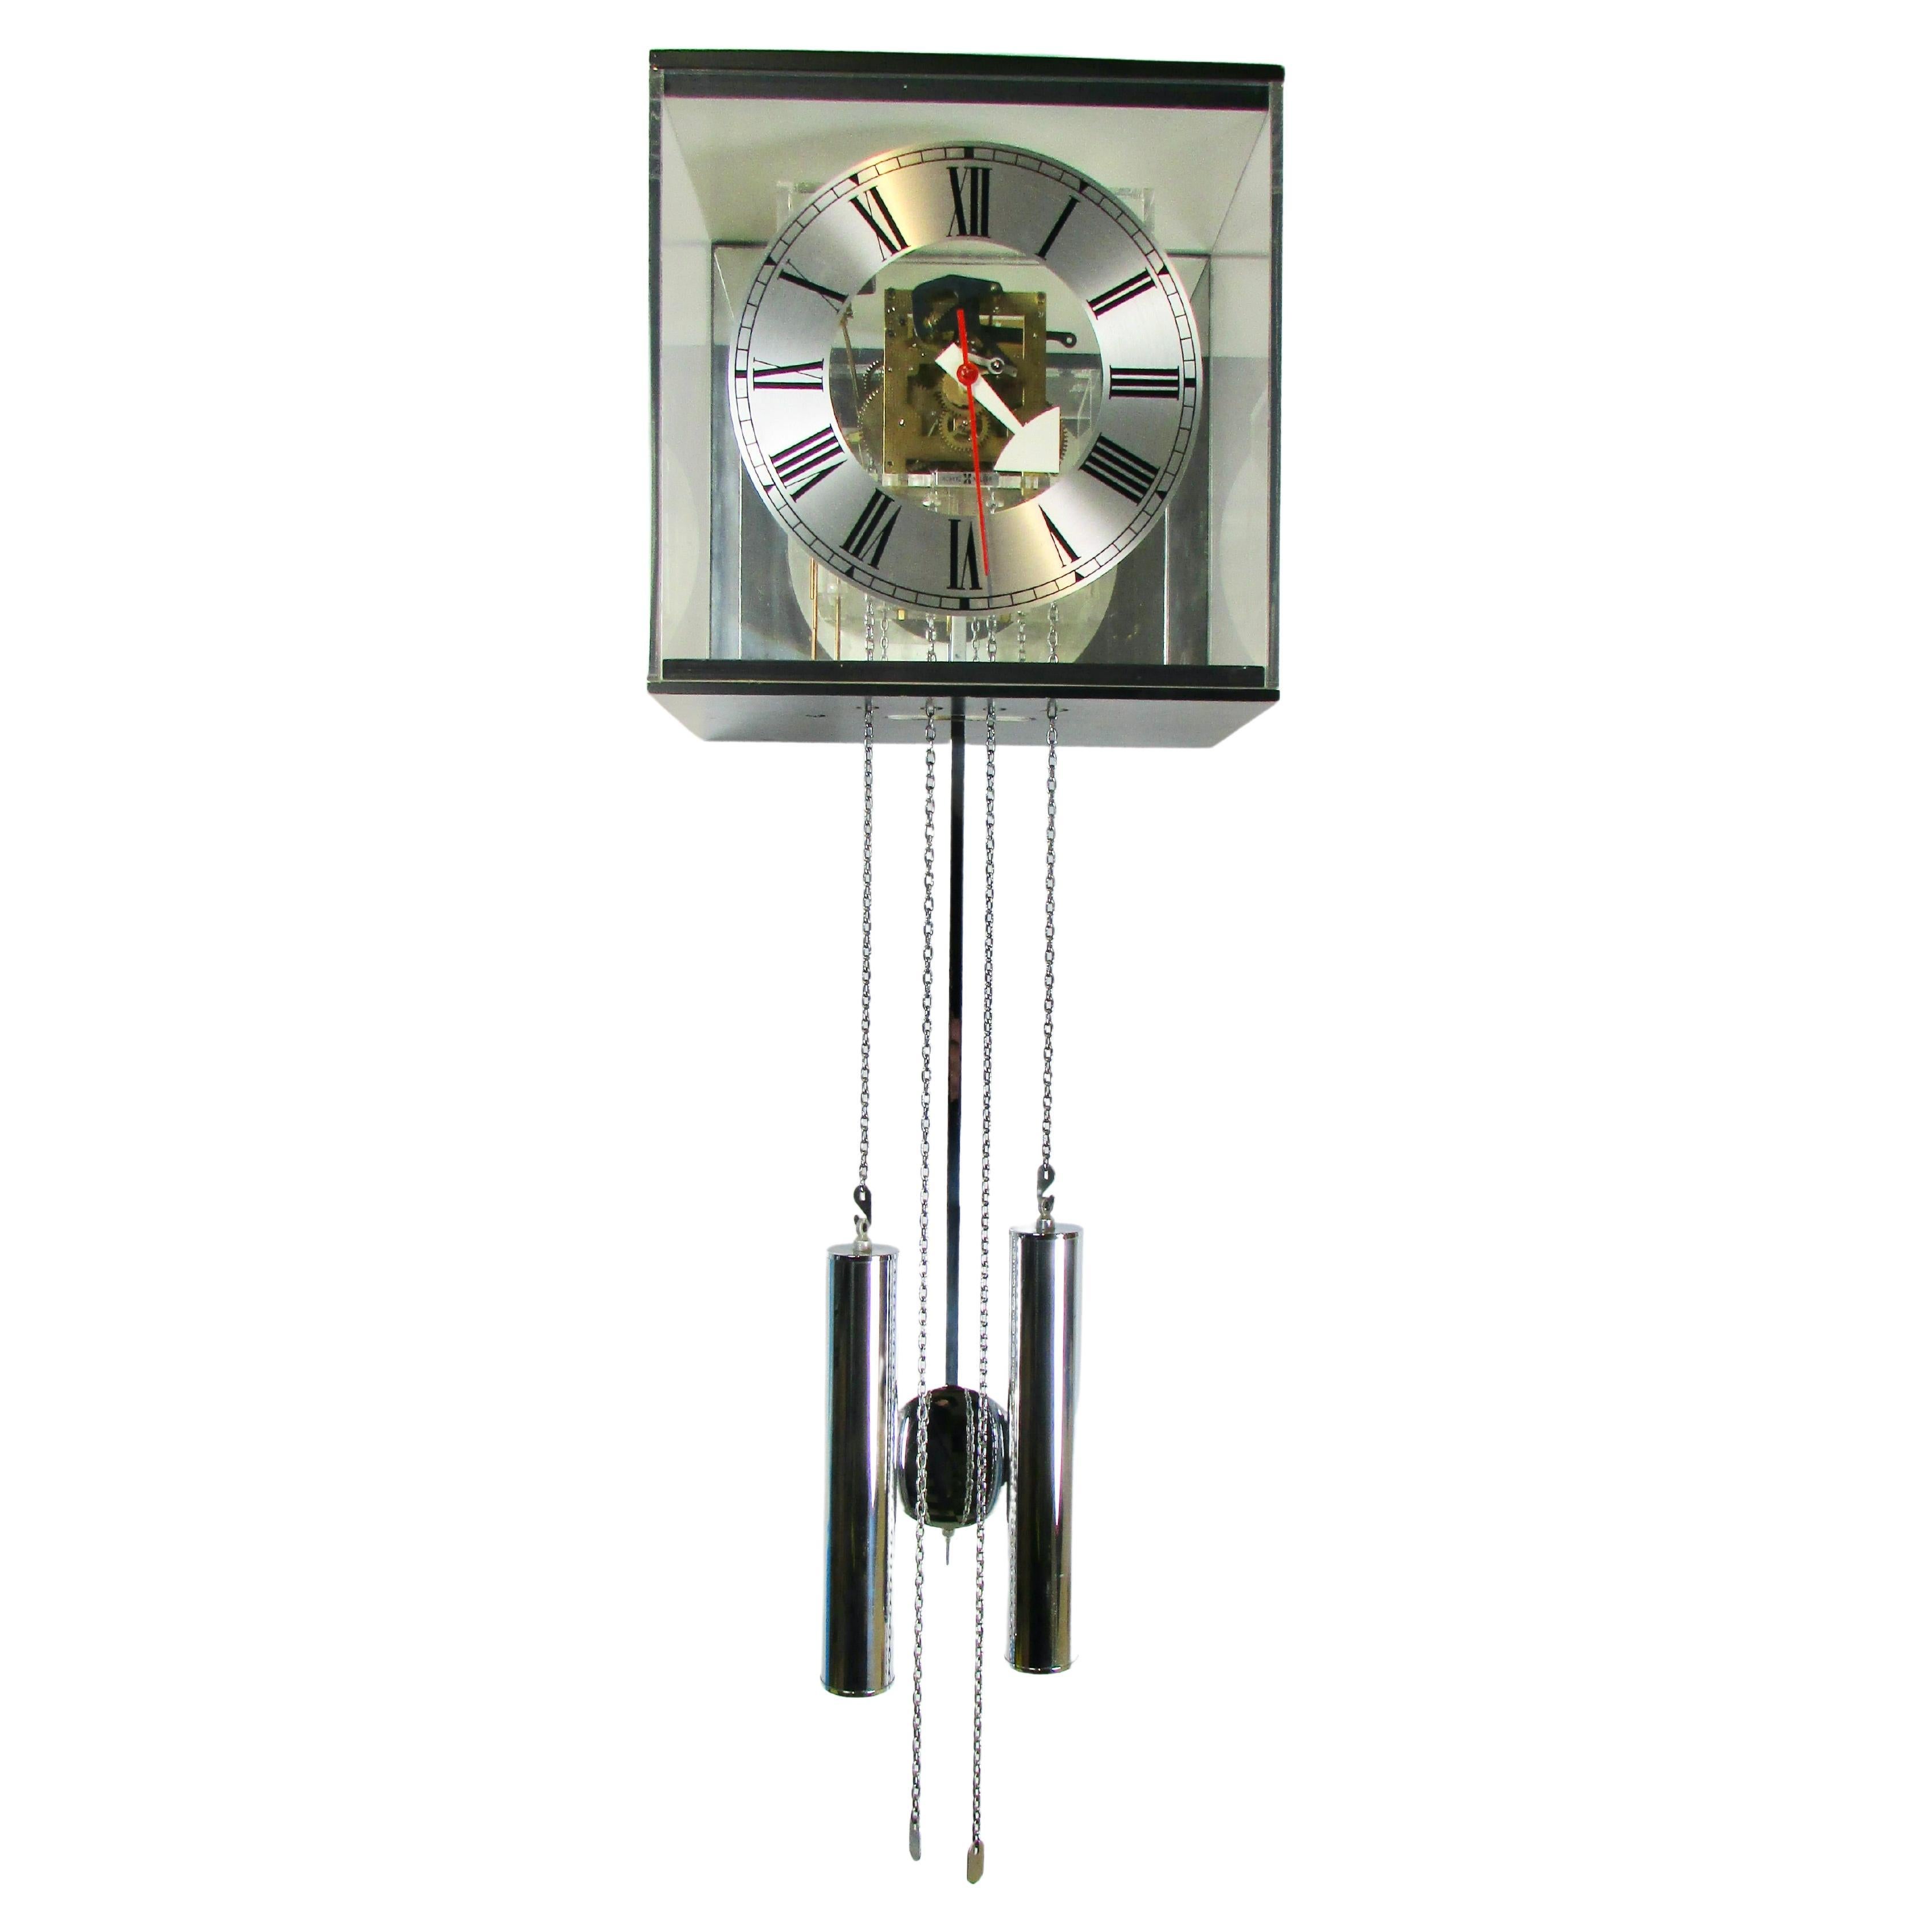 Modernist take on a kind of deconstructed grandfather clock look. Lucite case allows internal works to be part of the design. Eight day weights, chains and pendulum in chrome. Clock has charming chimes on the hour and once at half past. 
Arthur